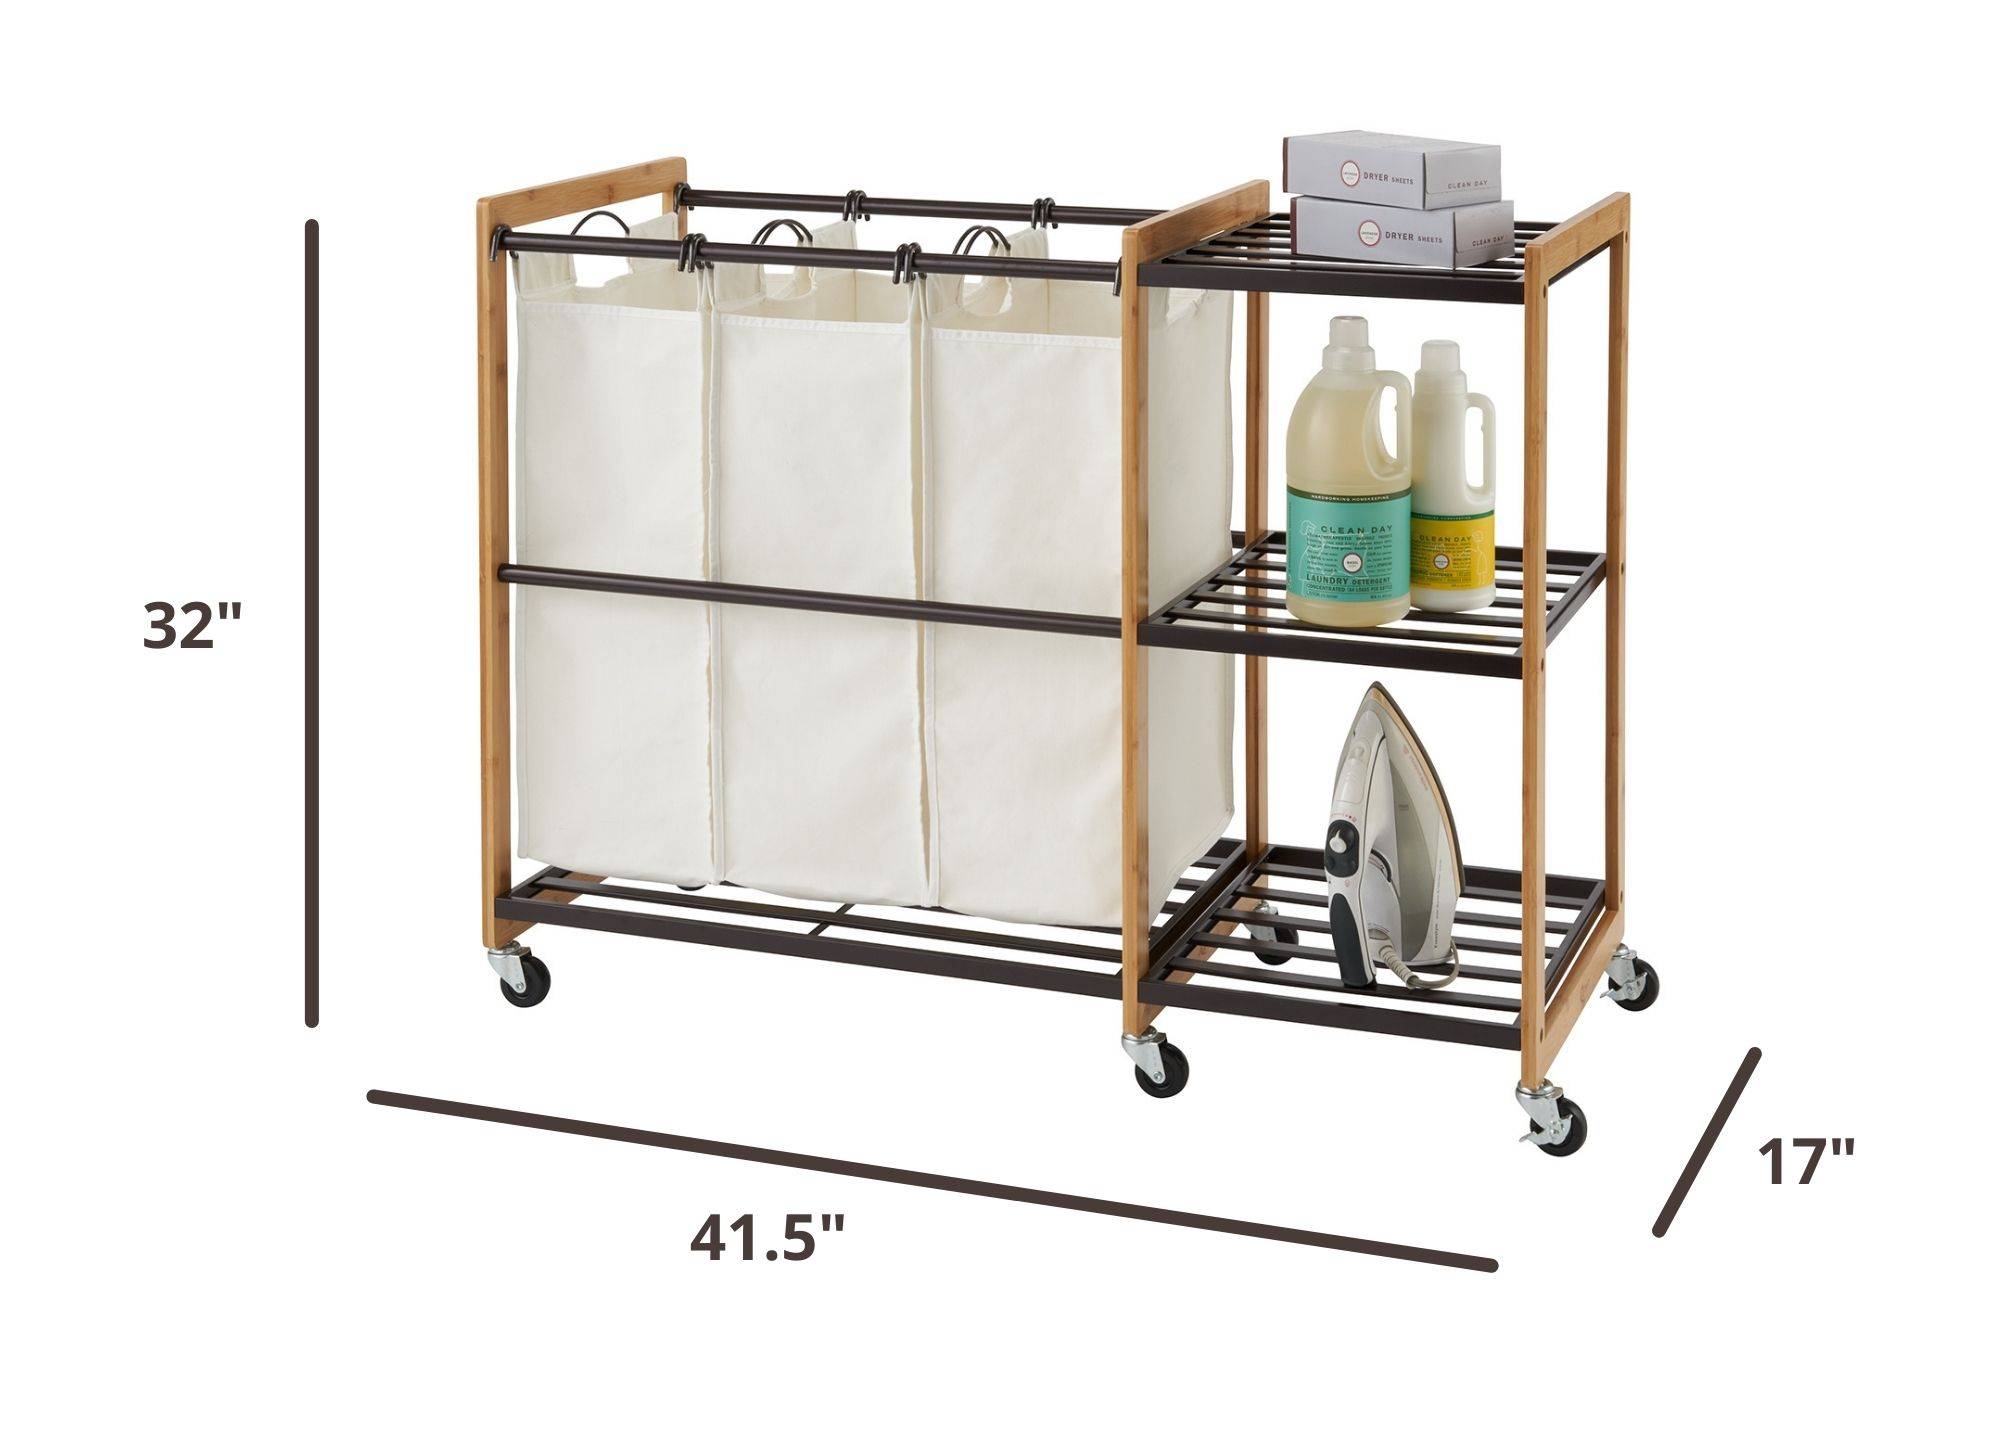 large, 41.5 inches wide by 32 inches tall laundry station with wheels